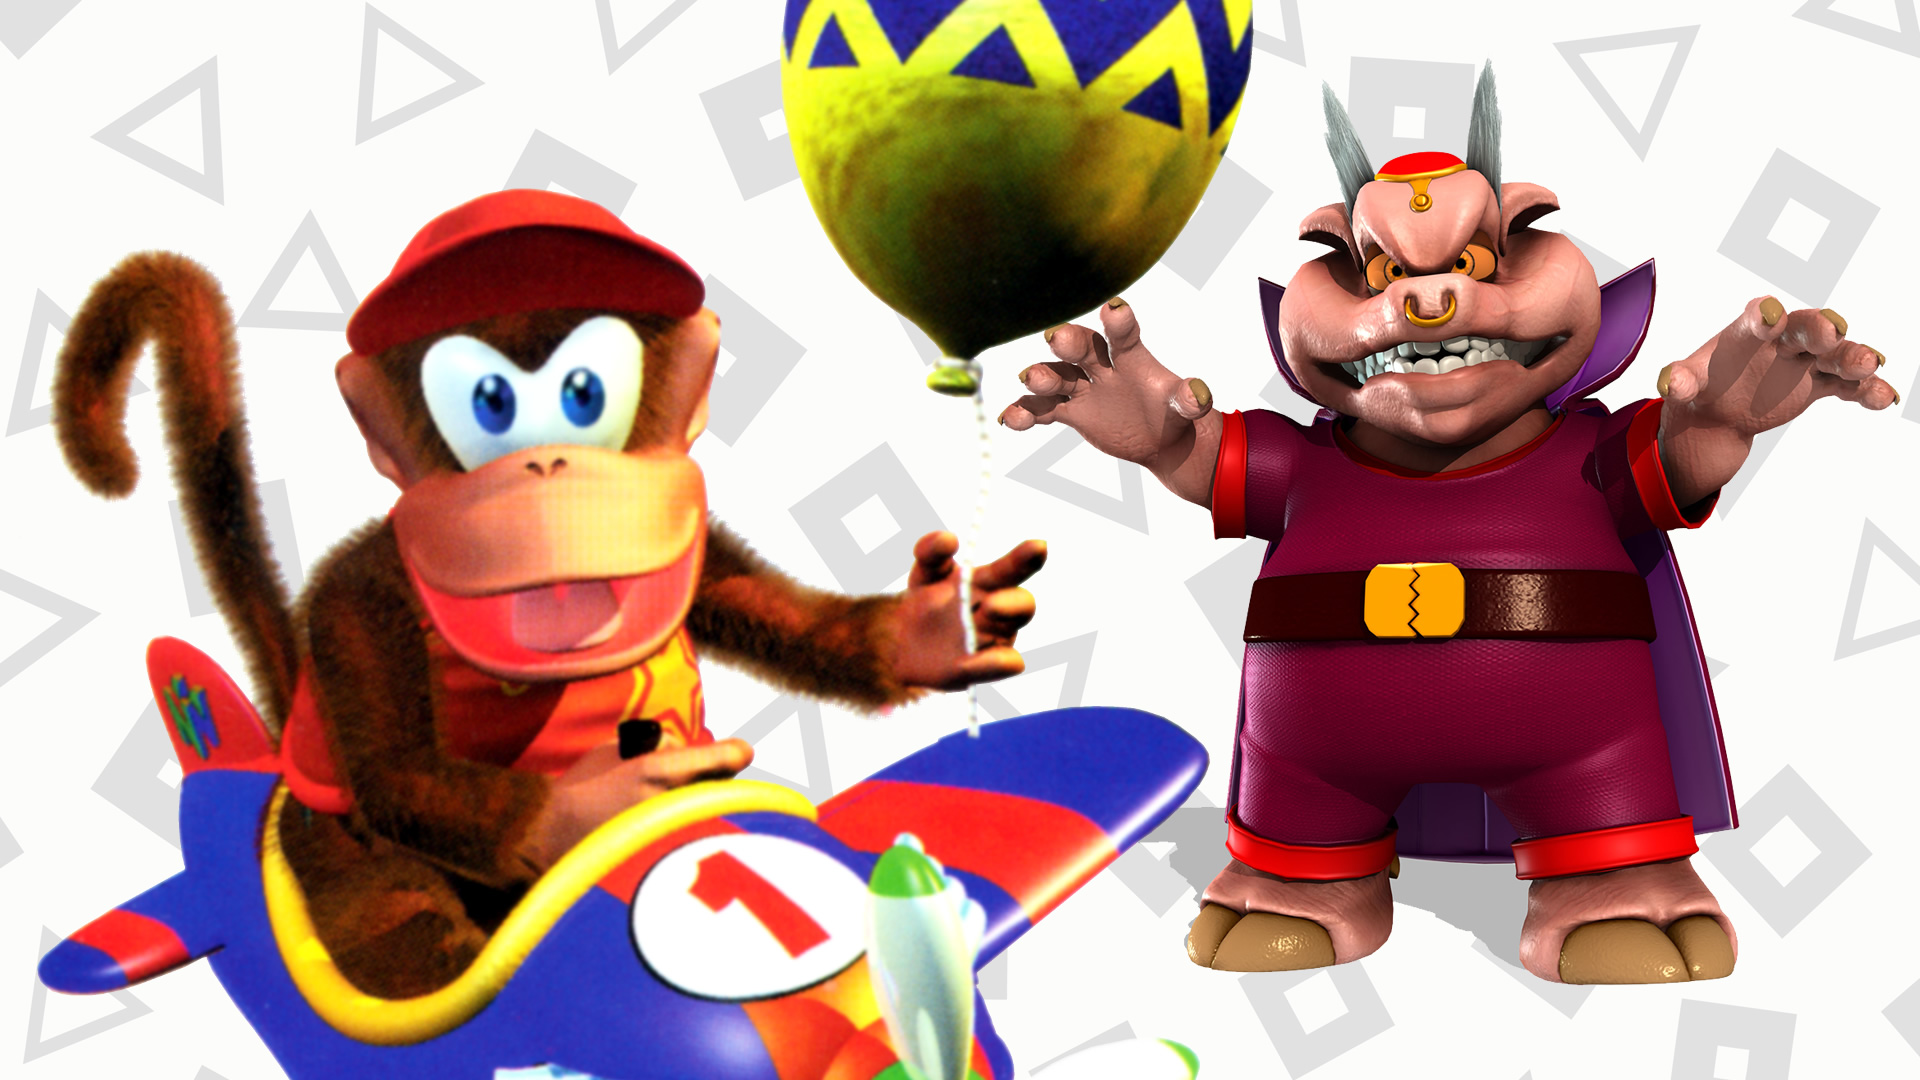 Why Diddy Kong Racing is Still Great